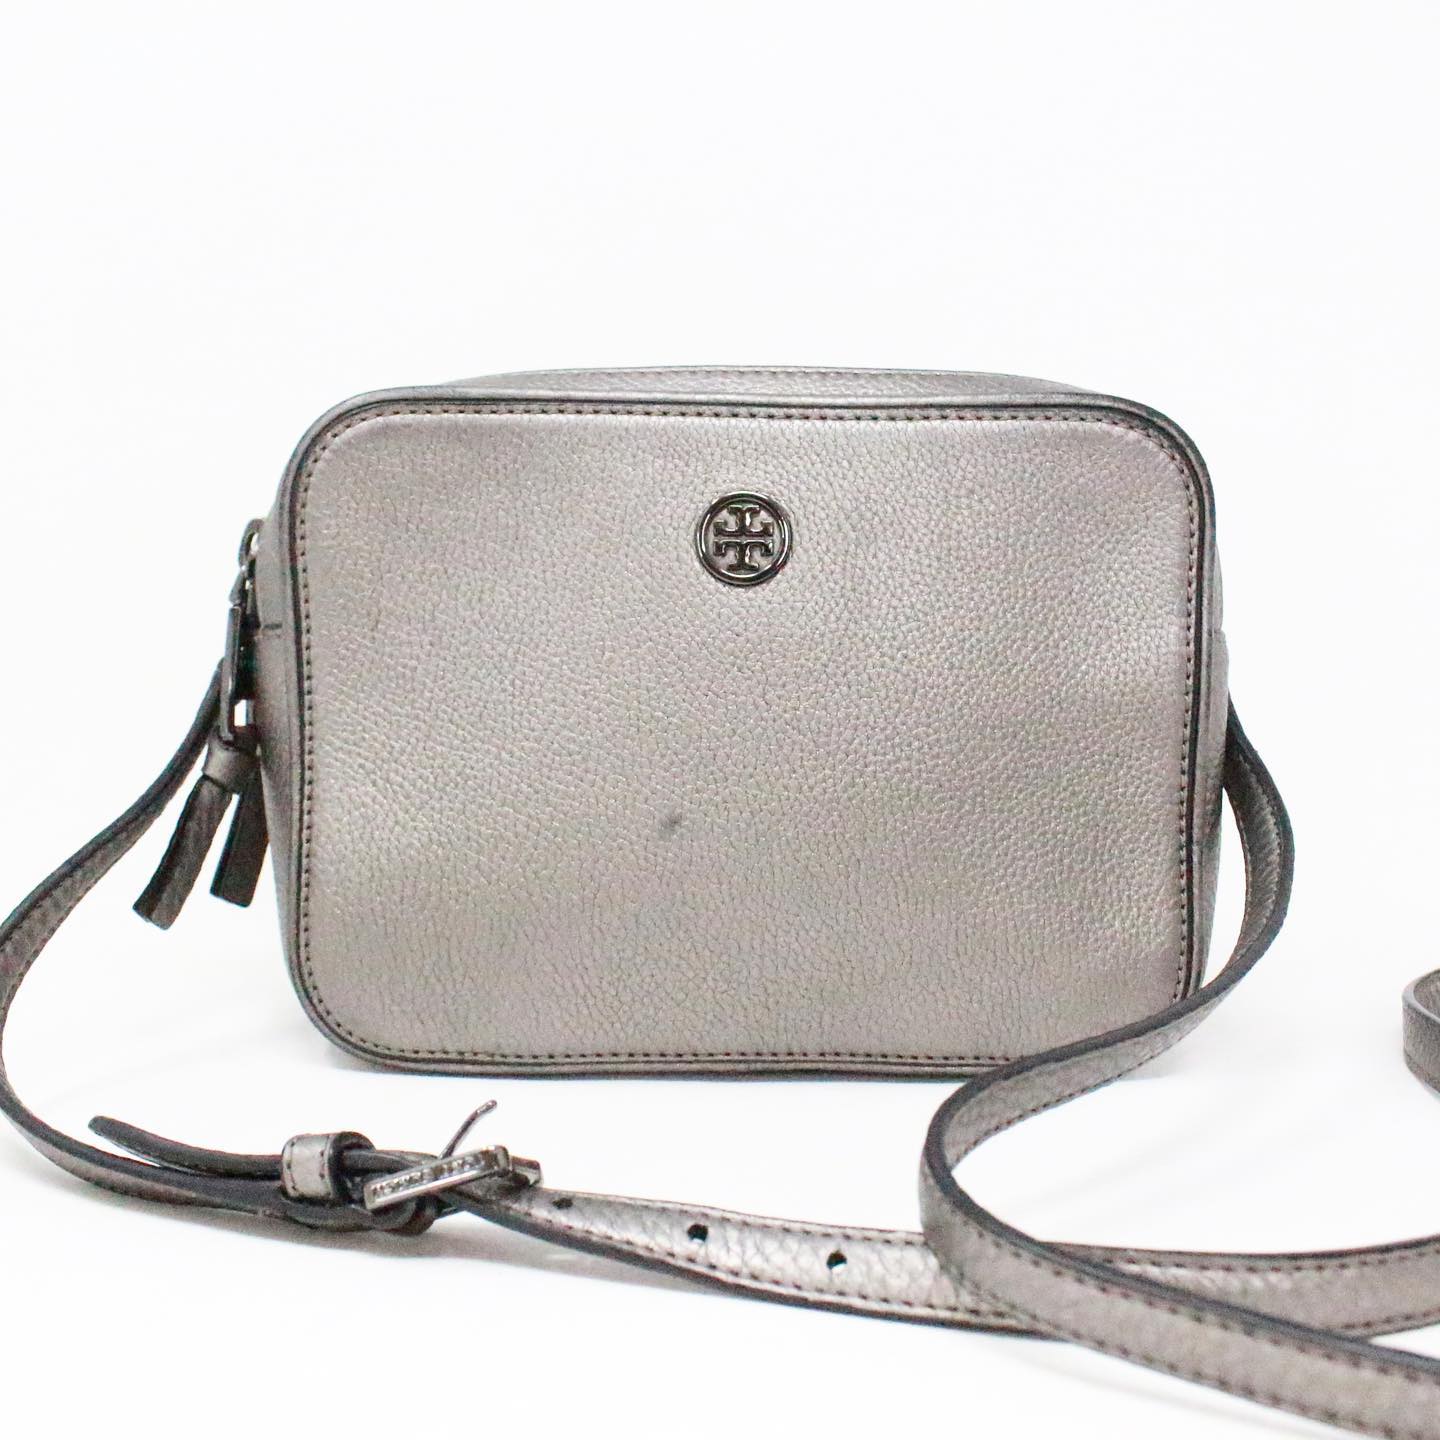 servant Carry skirmish TORY BURCH #37478 Double Zip Grey Pebbled Leather Crossbody – ALL YOUR BLISS